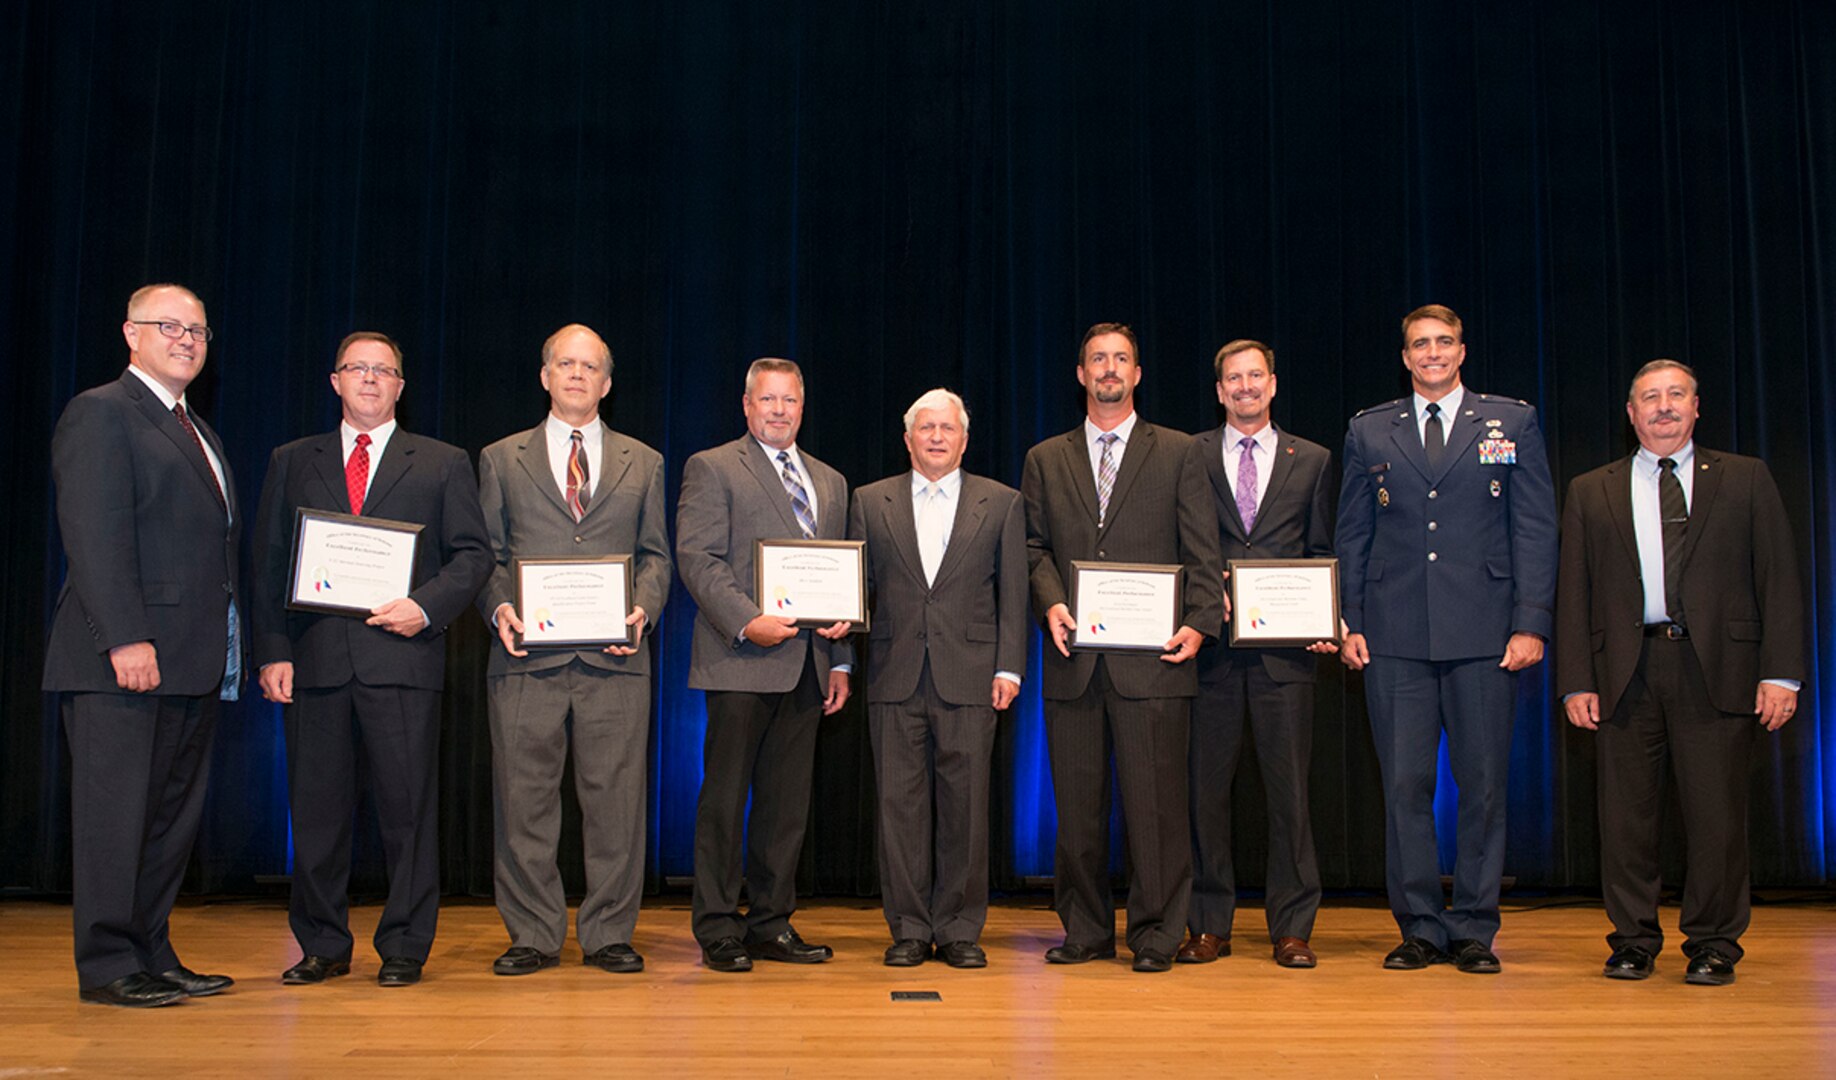 Stephen Welby, deputy assistant secretary of defense for systems engineering, left, poses with the DLA Value Engineering Achievement Award winners. The Department of Defense presented the FY 2014 Department of Defense Value Engineering Achievement Awards during a ceremony at the Pentagon, Washington, D.C., June 25, 2015. 